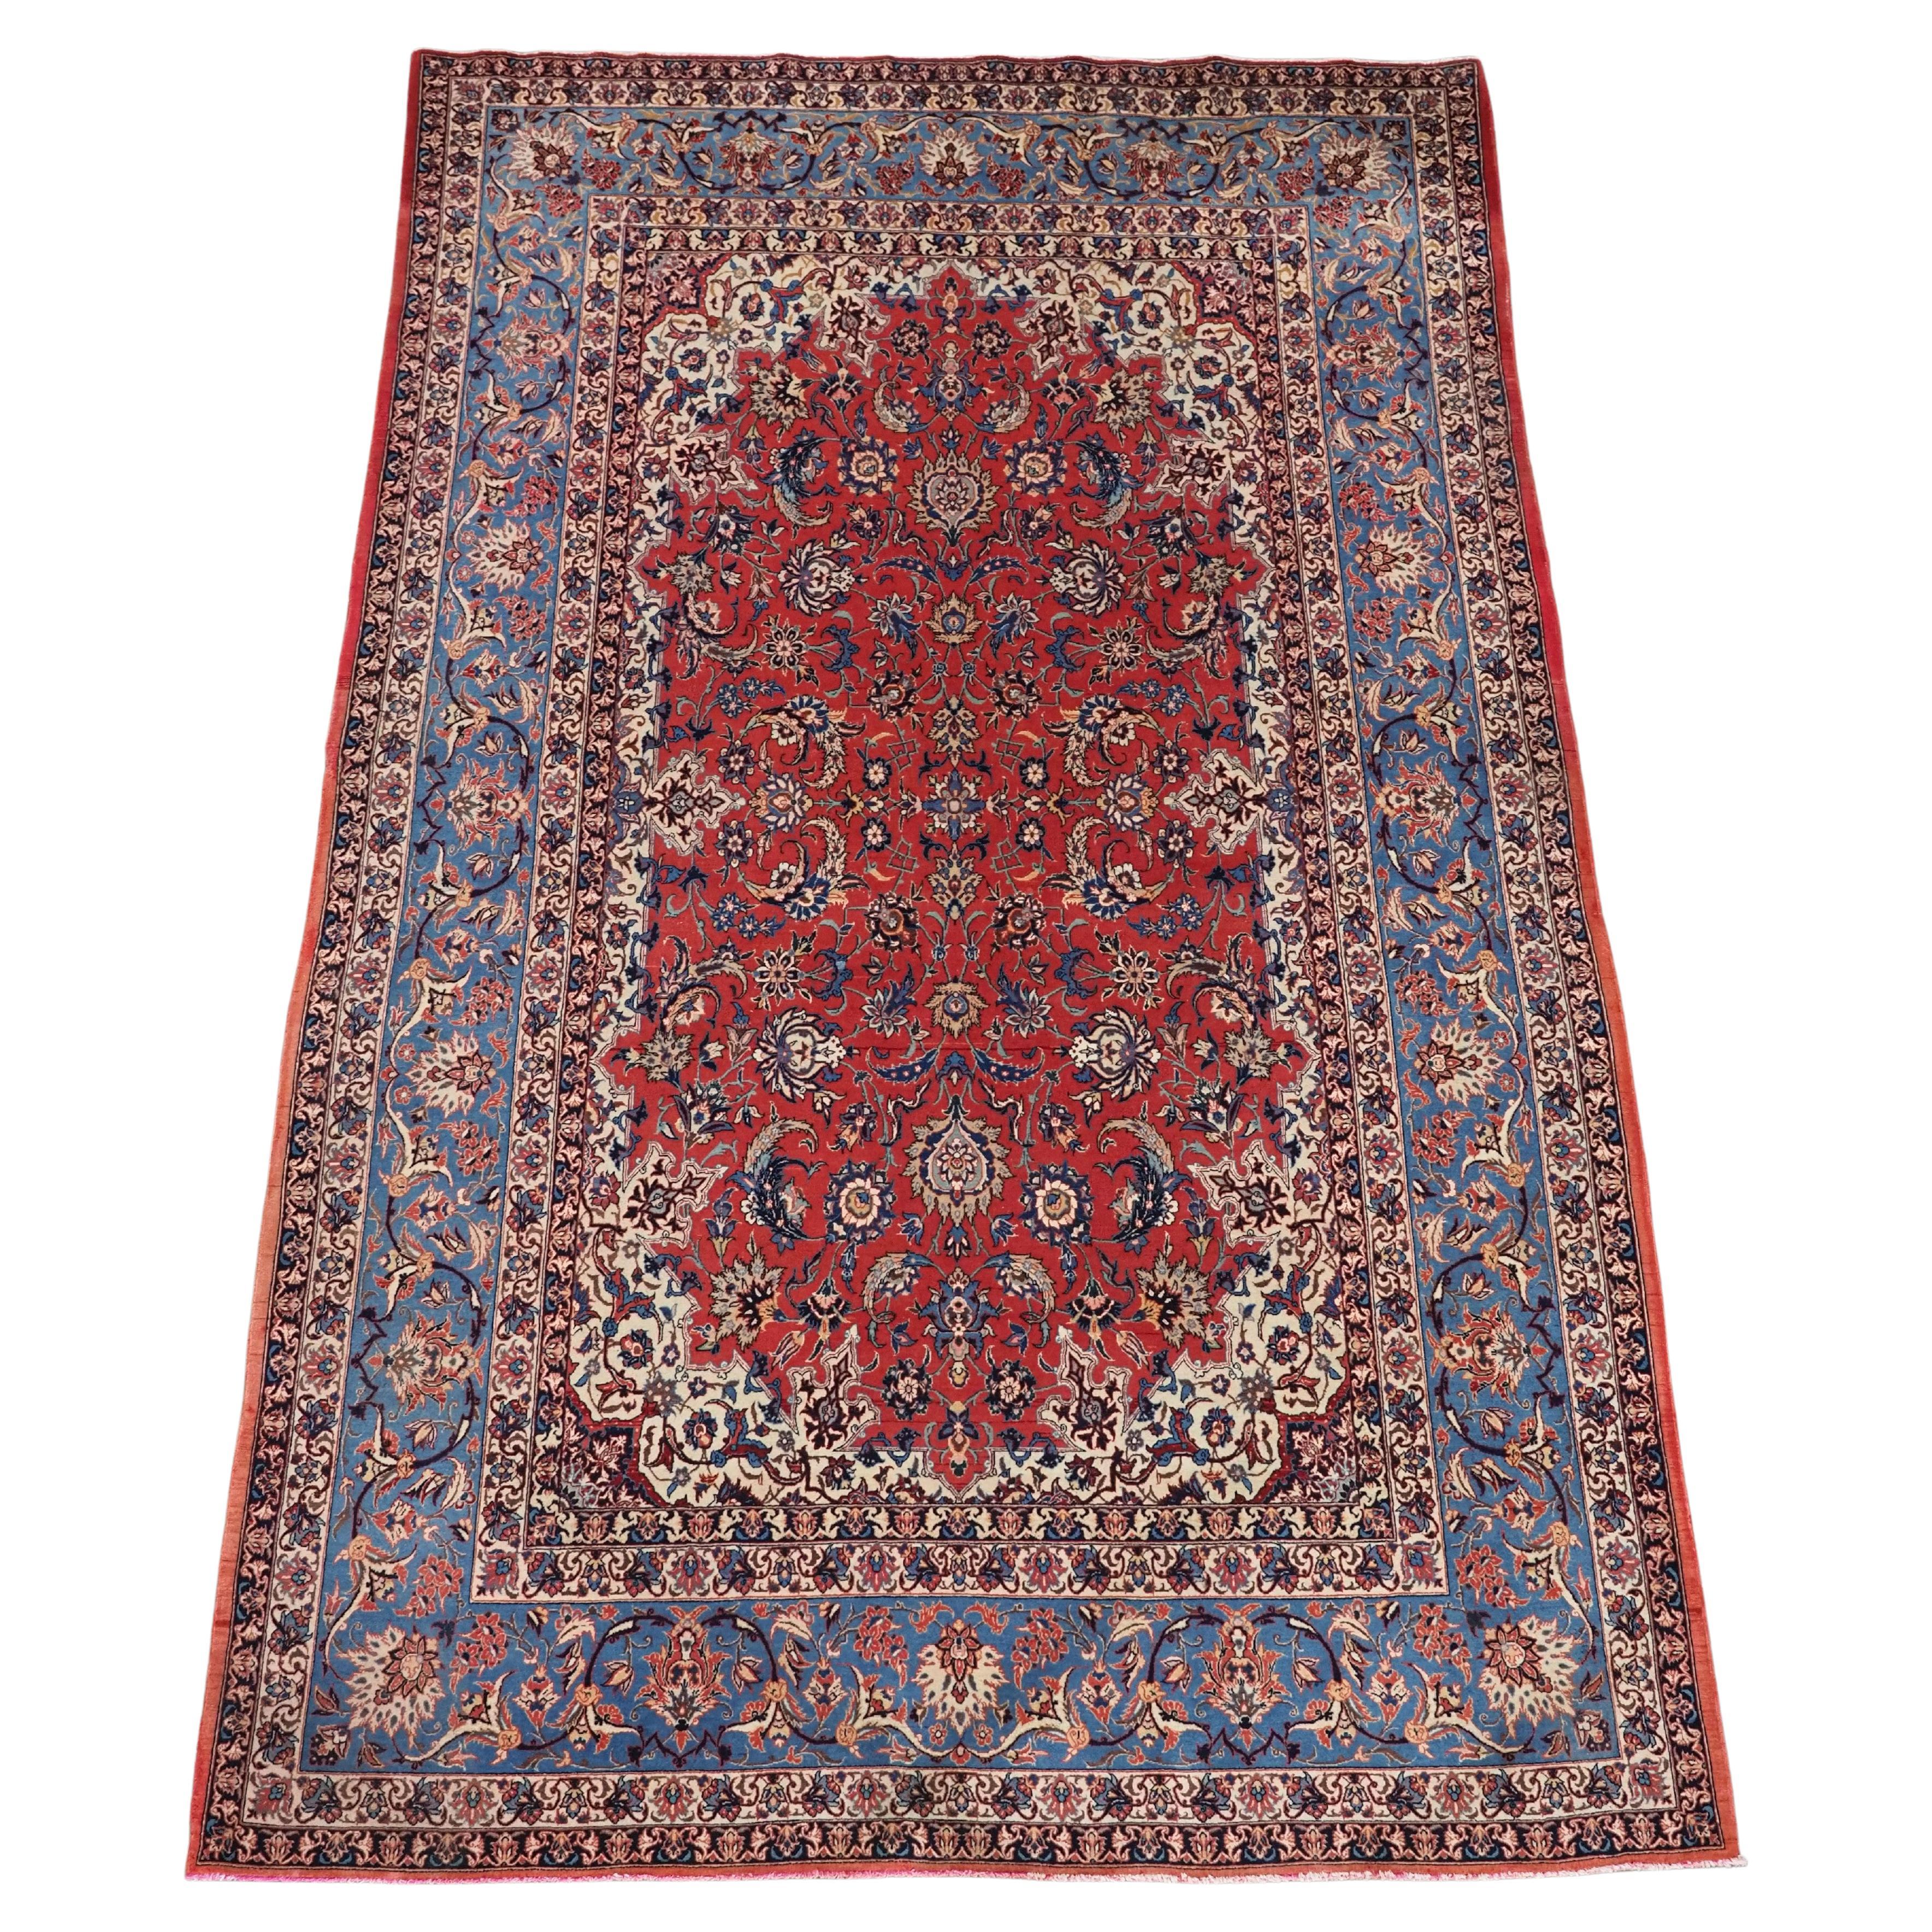 Antique Isfahan rug with all over design on warm red ground, circa 1920. For Sale